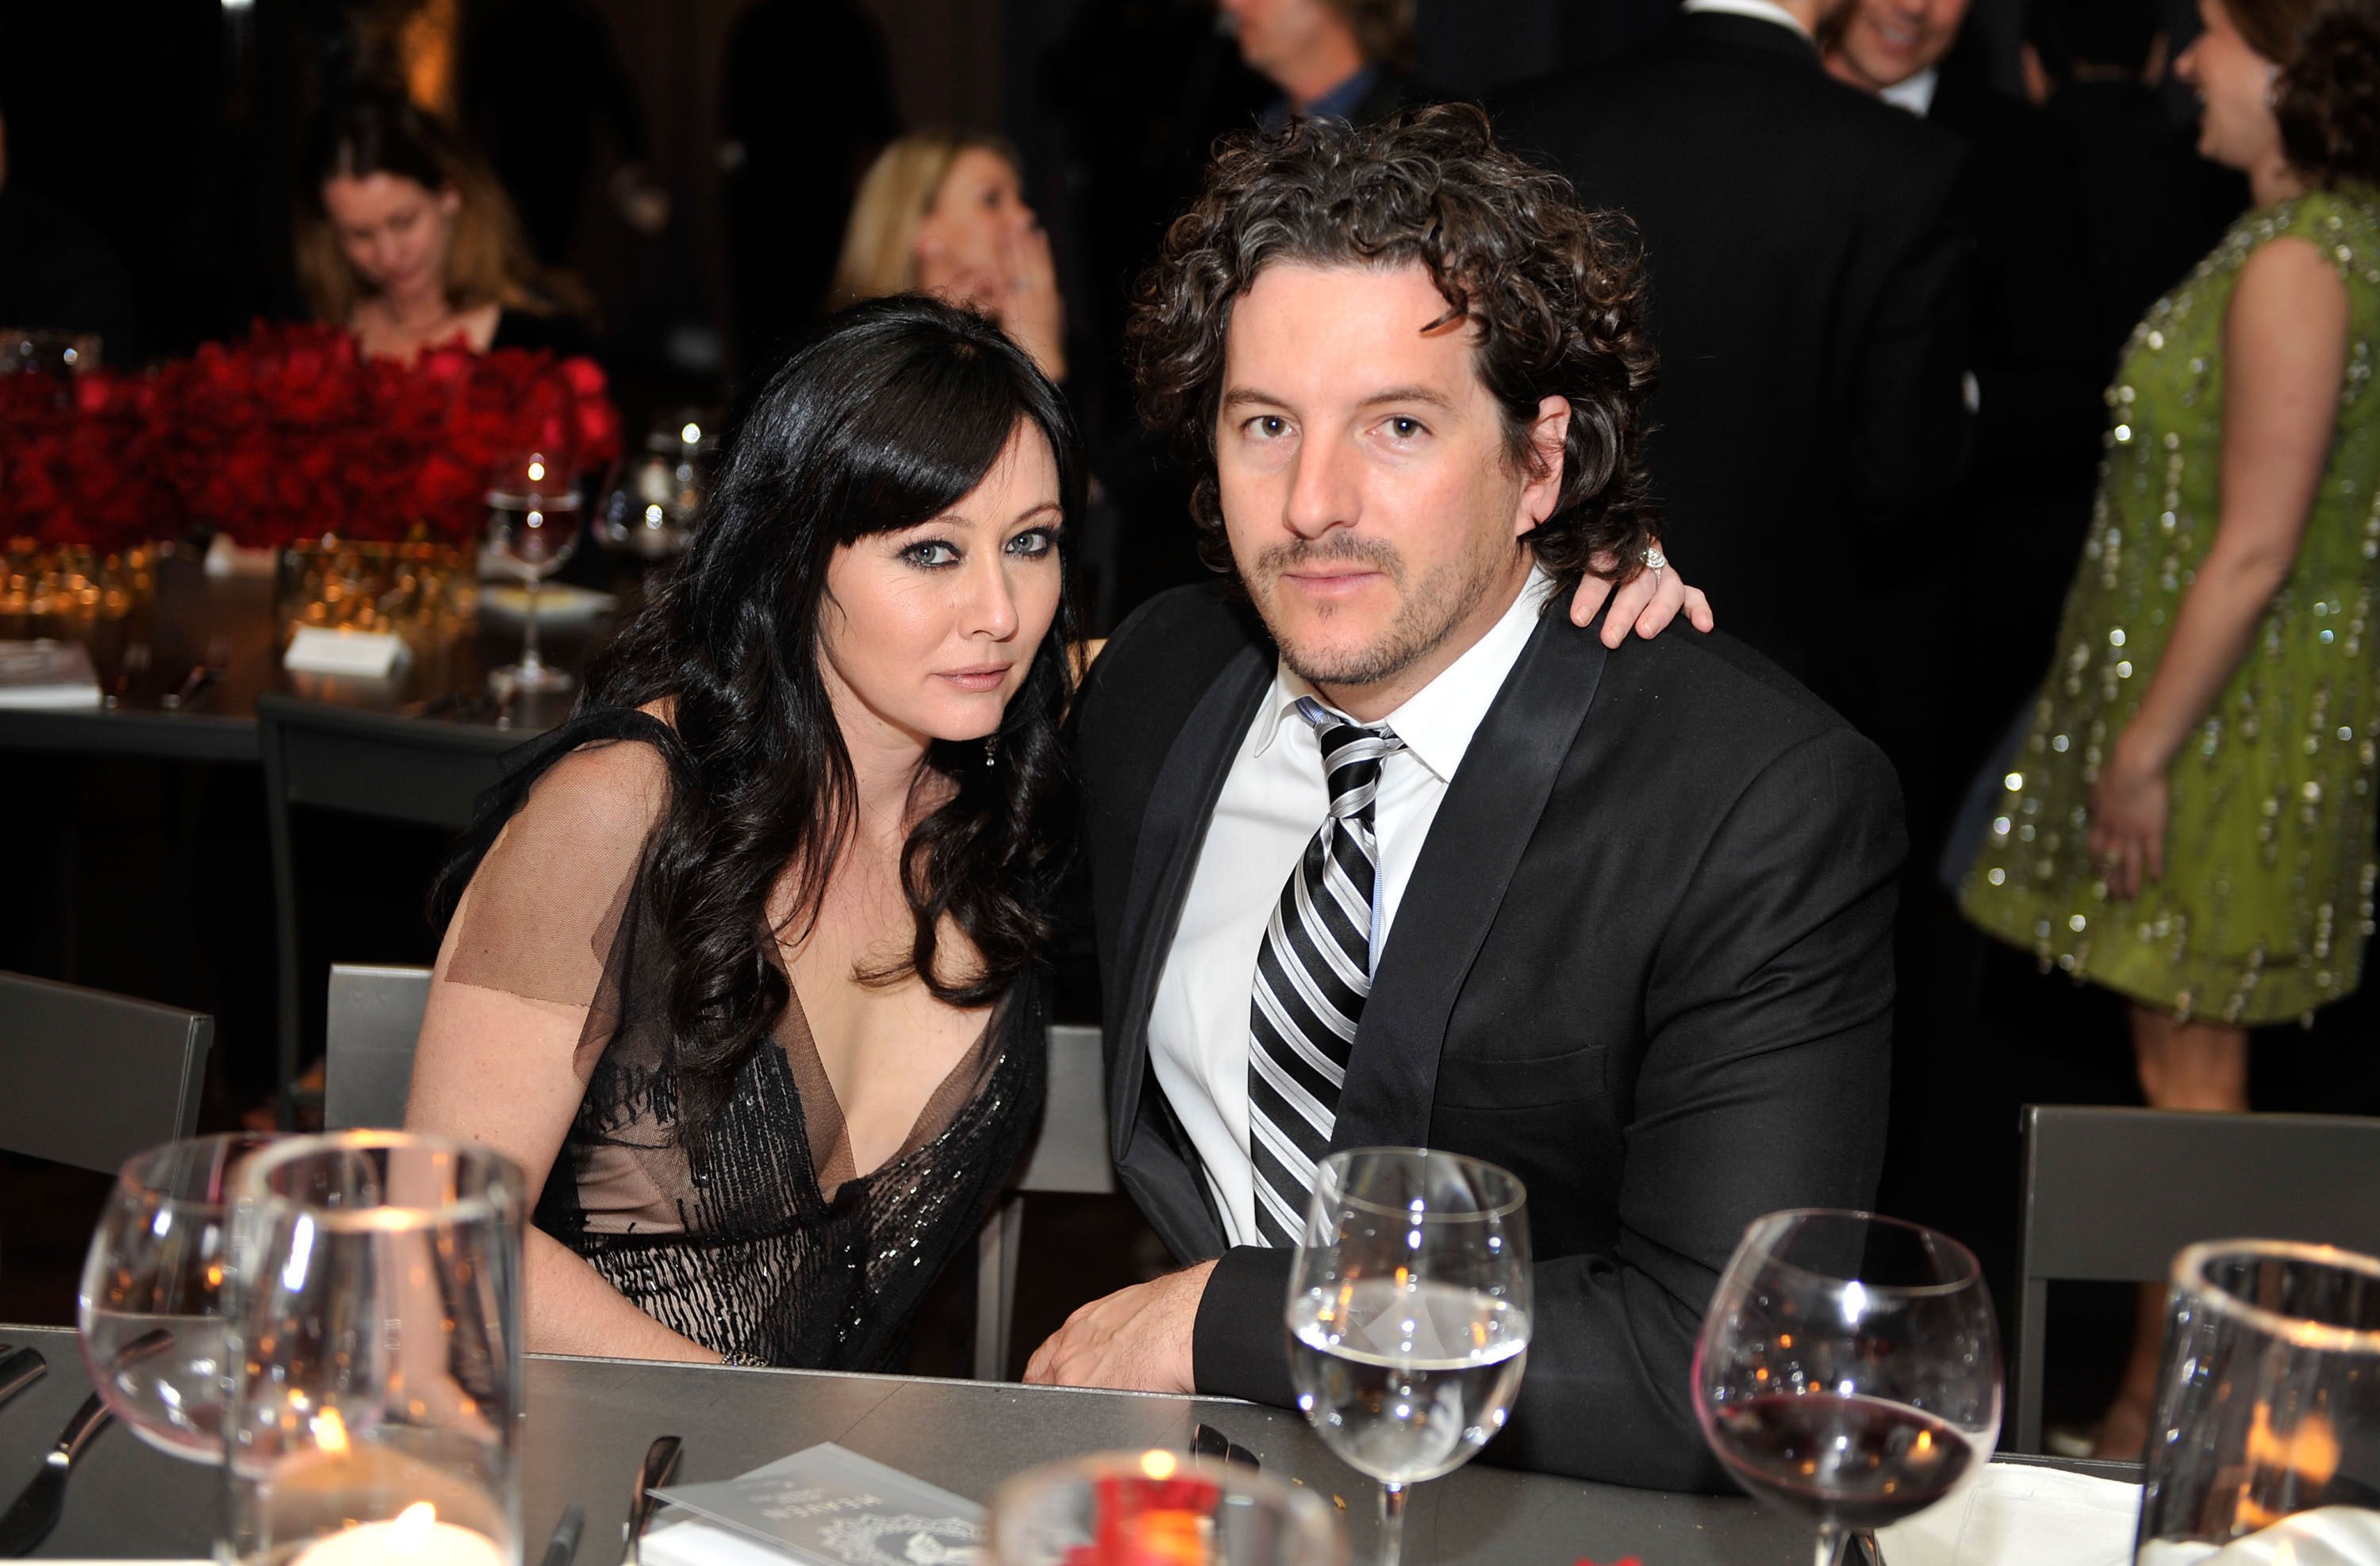 Shannen Doherty is asking her estranged ex-husband Kurt Iswarienko to pay spousal support and help with her lawyer’s fees. Photo: WireImage